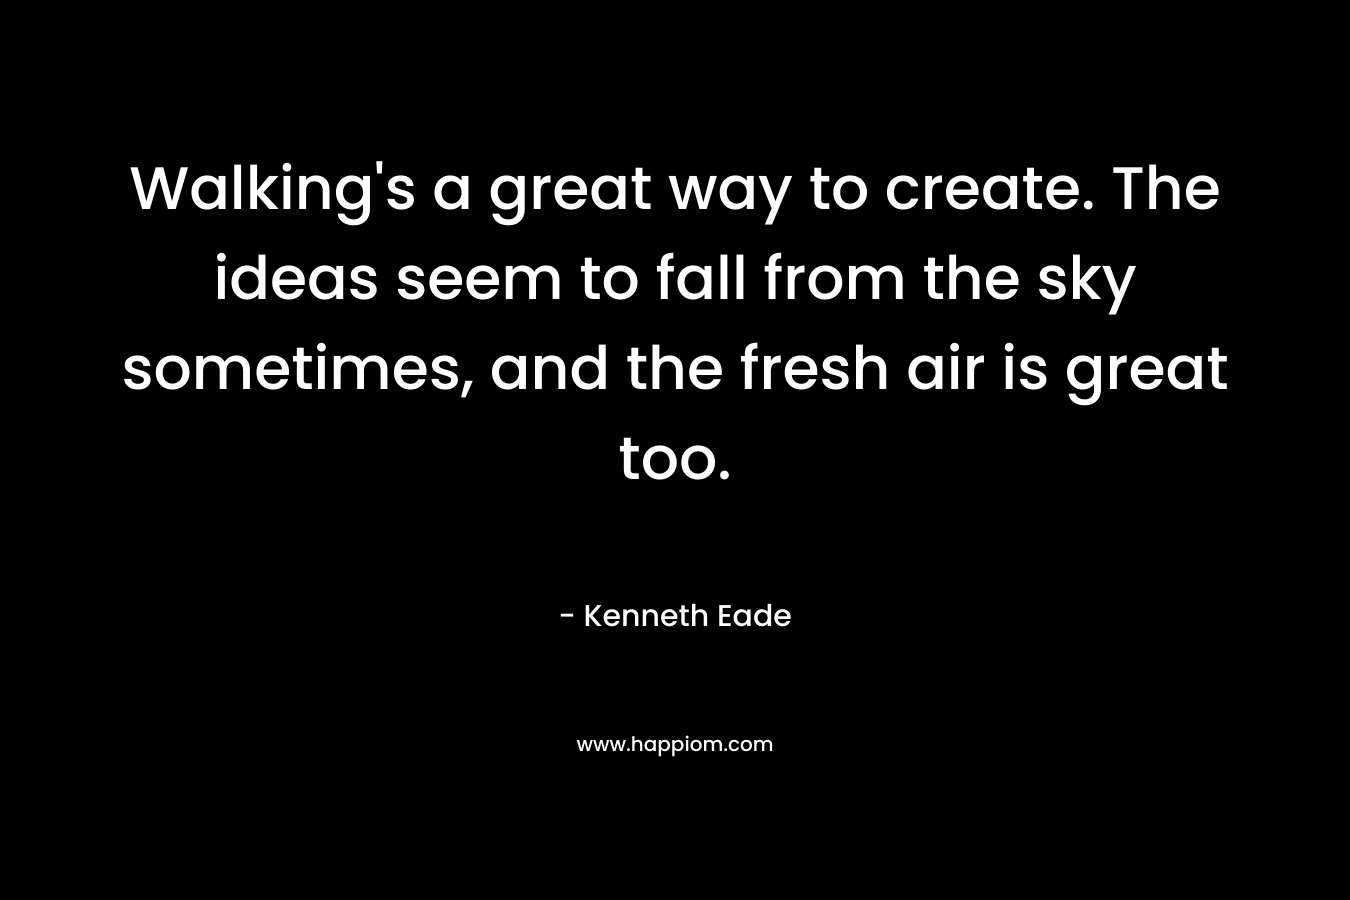 Walking's a great way to create. The ideas seem to fall from the sky sometimes, and the fresh air is great too.